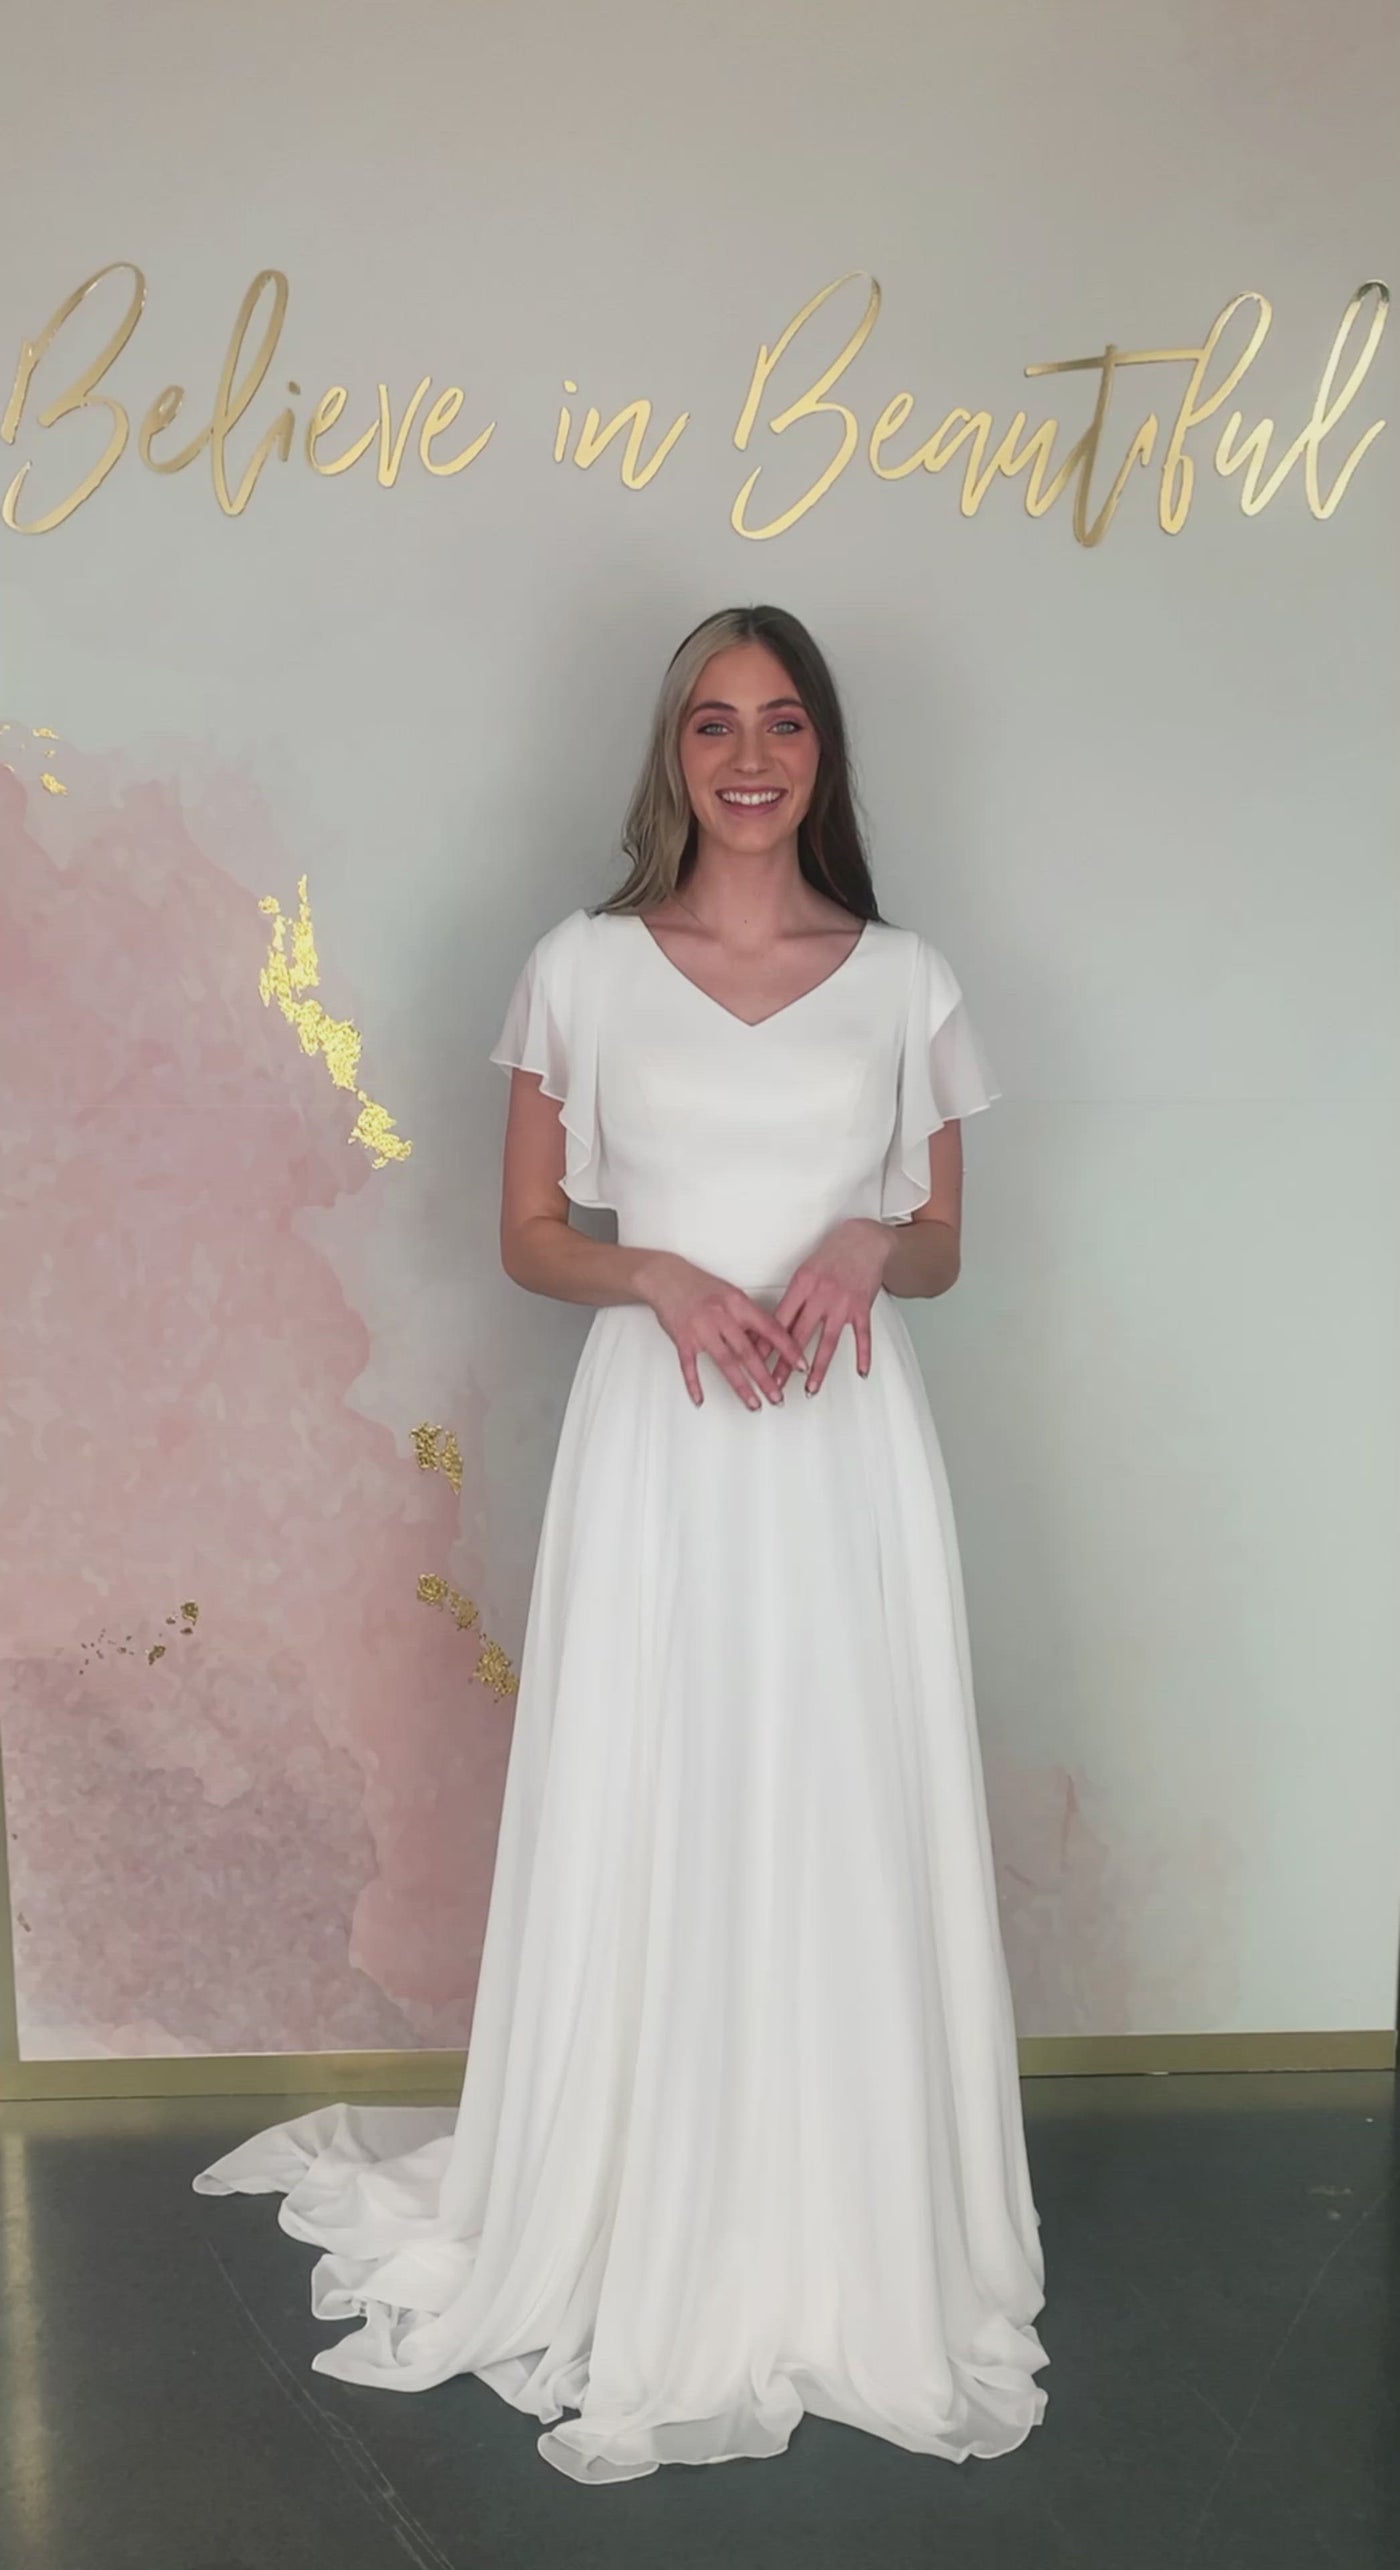 A video featuring our Brienne wedding dress and its flowy, boho chiffon skirt with matching flutter sleeves.